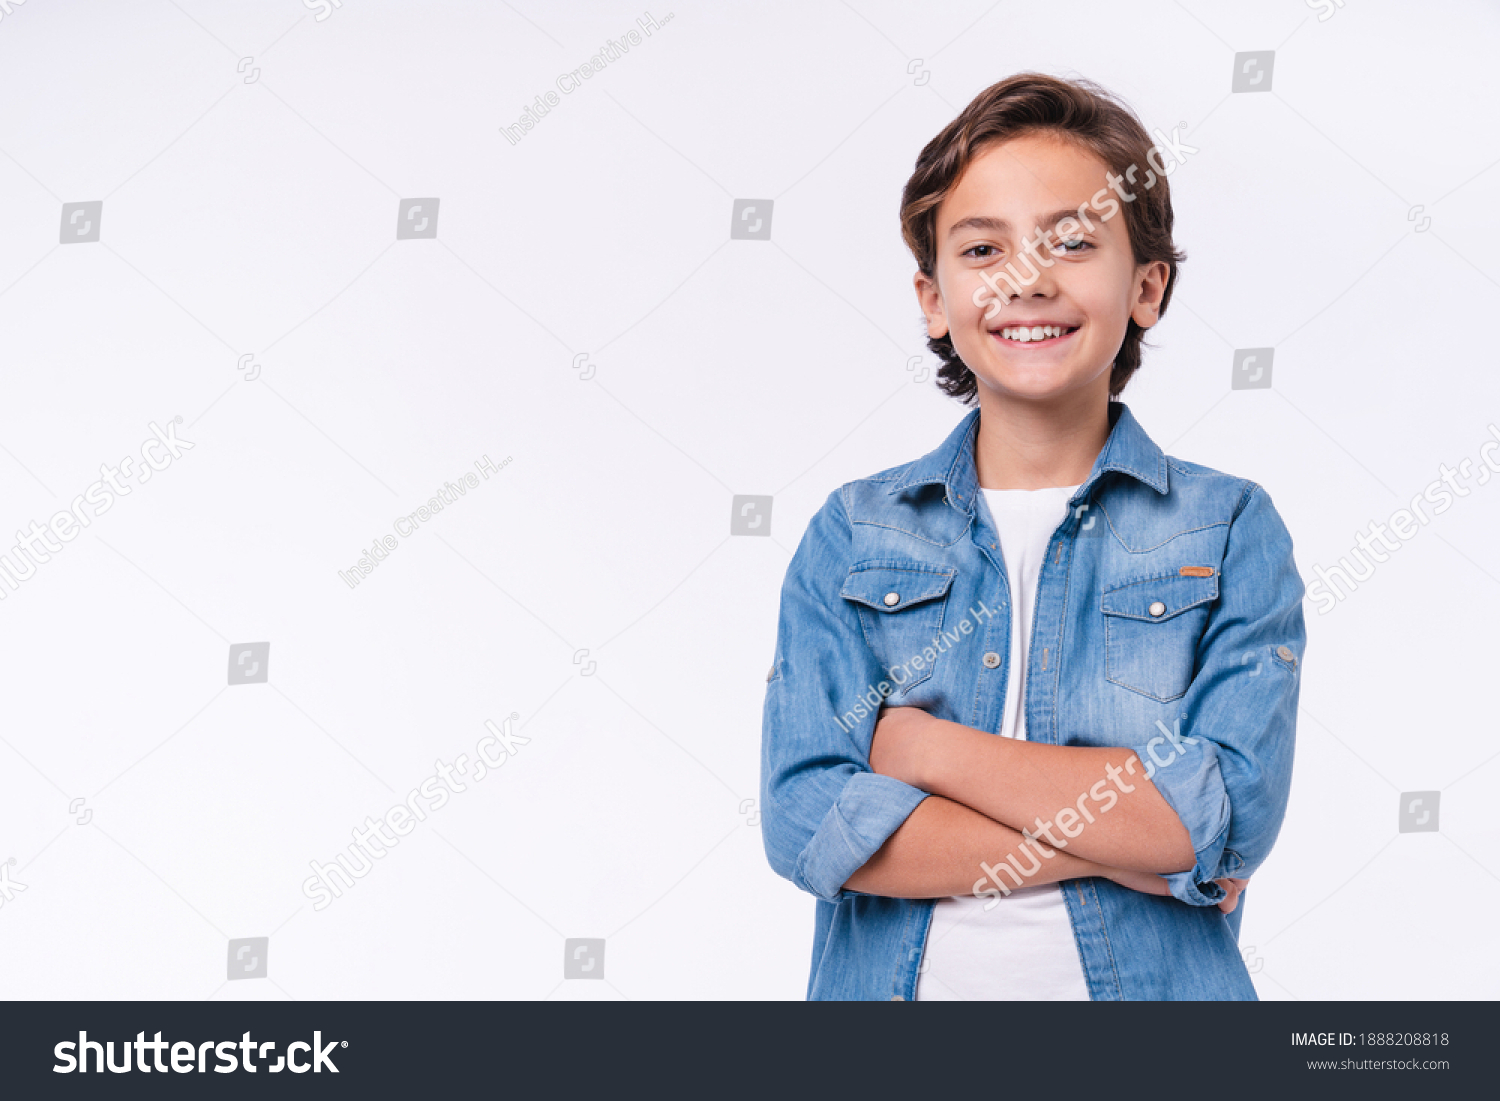 Happy young caucasian boy in casual outfit with arms crossed isolated over white background #1888208818